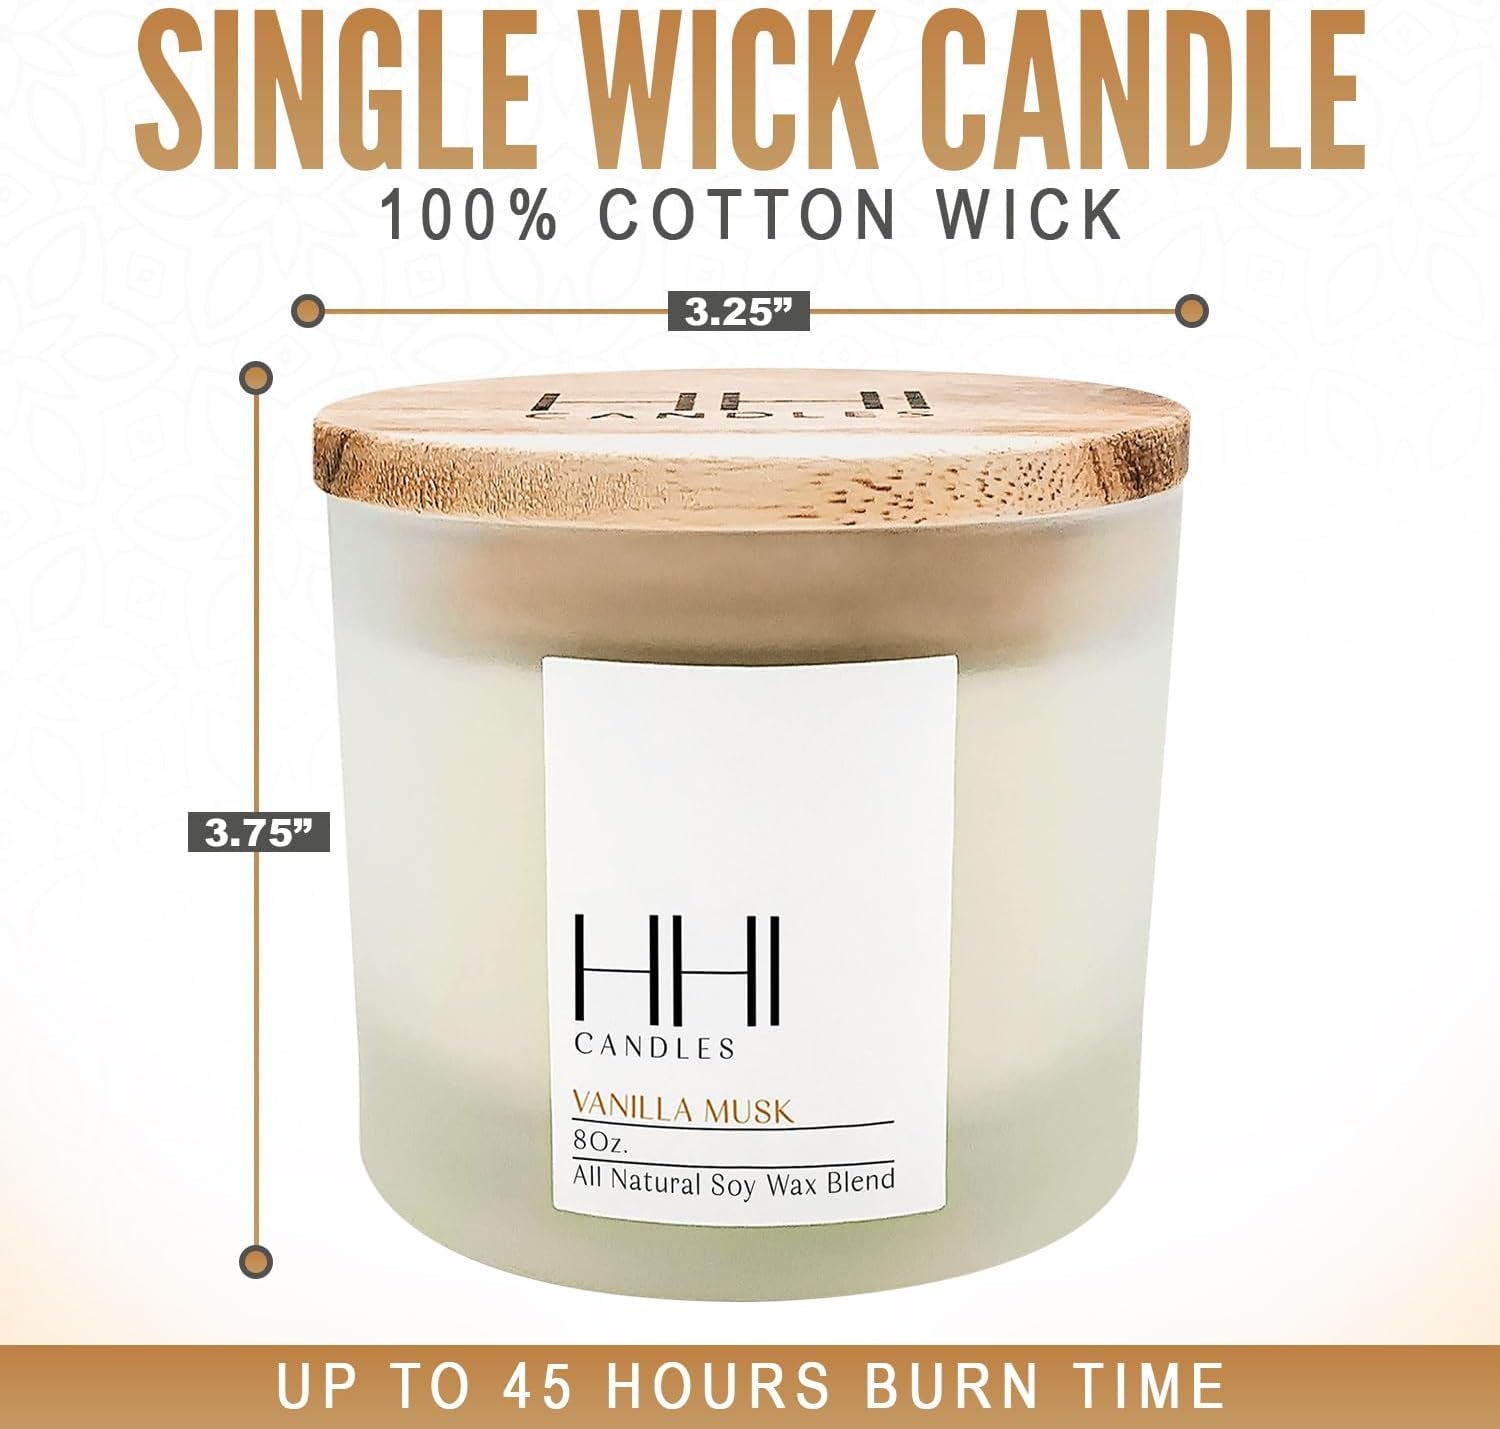 Vanilla Candle | Vanilla Musk Scented Soy Candle | a Blend of Vanilla, Cinnamon, Amber & Hint of Musk | Large Eight Ounce Single Wick Candle | Long Burn Time |